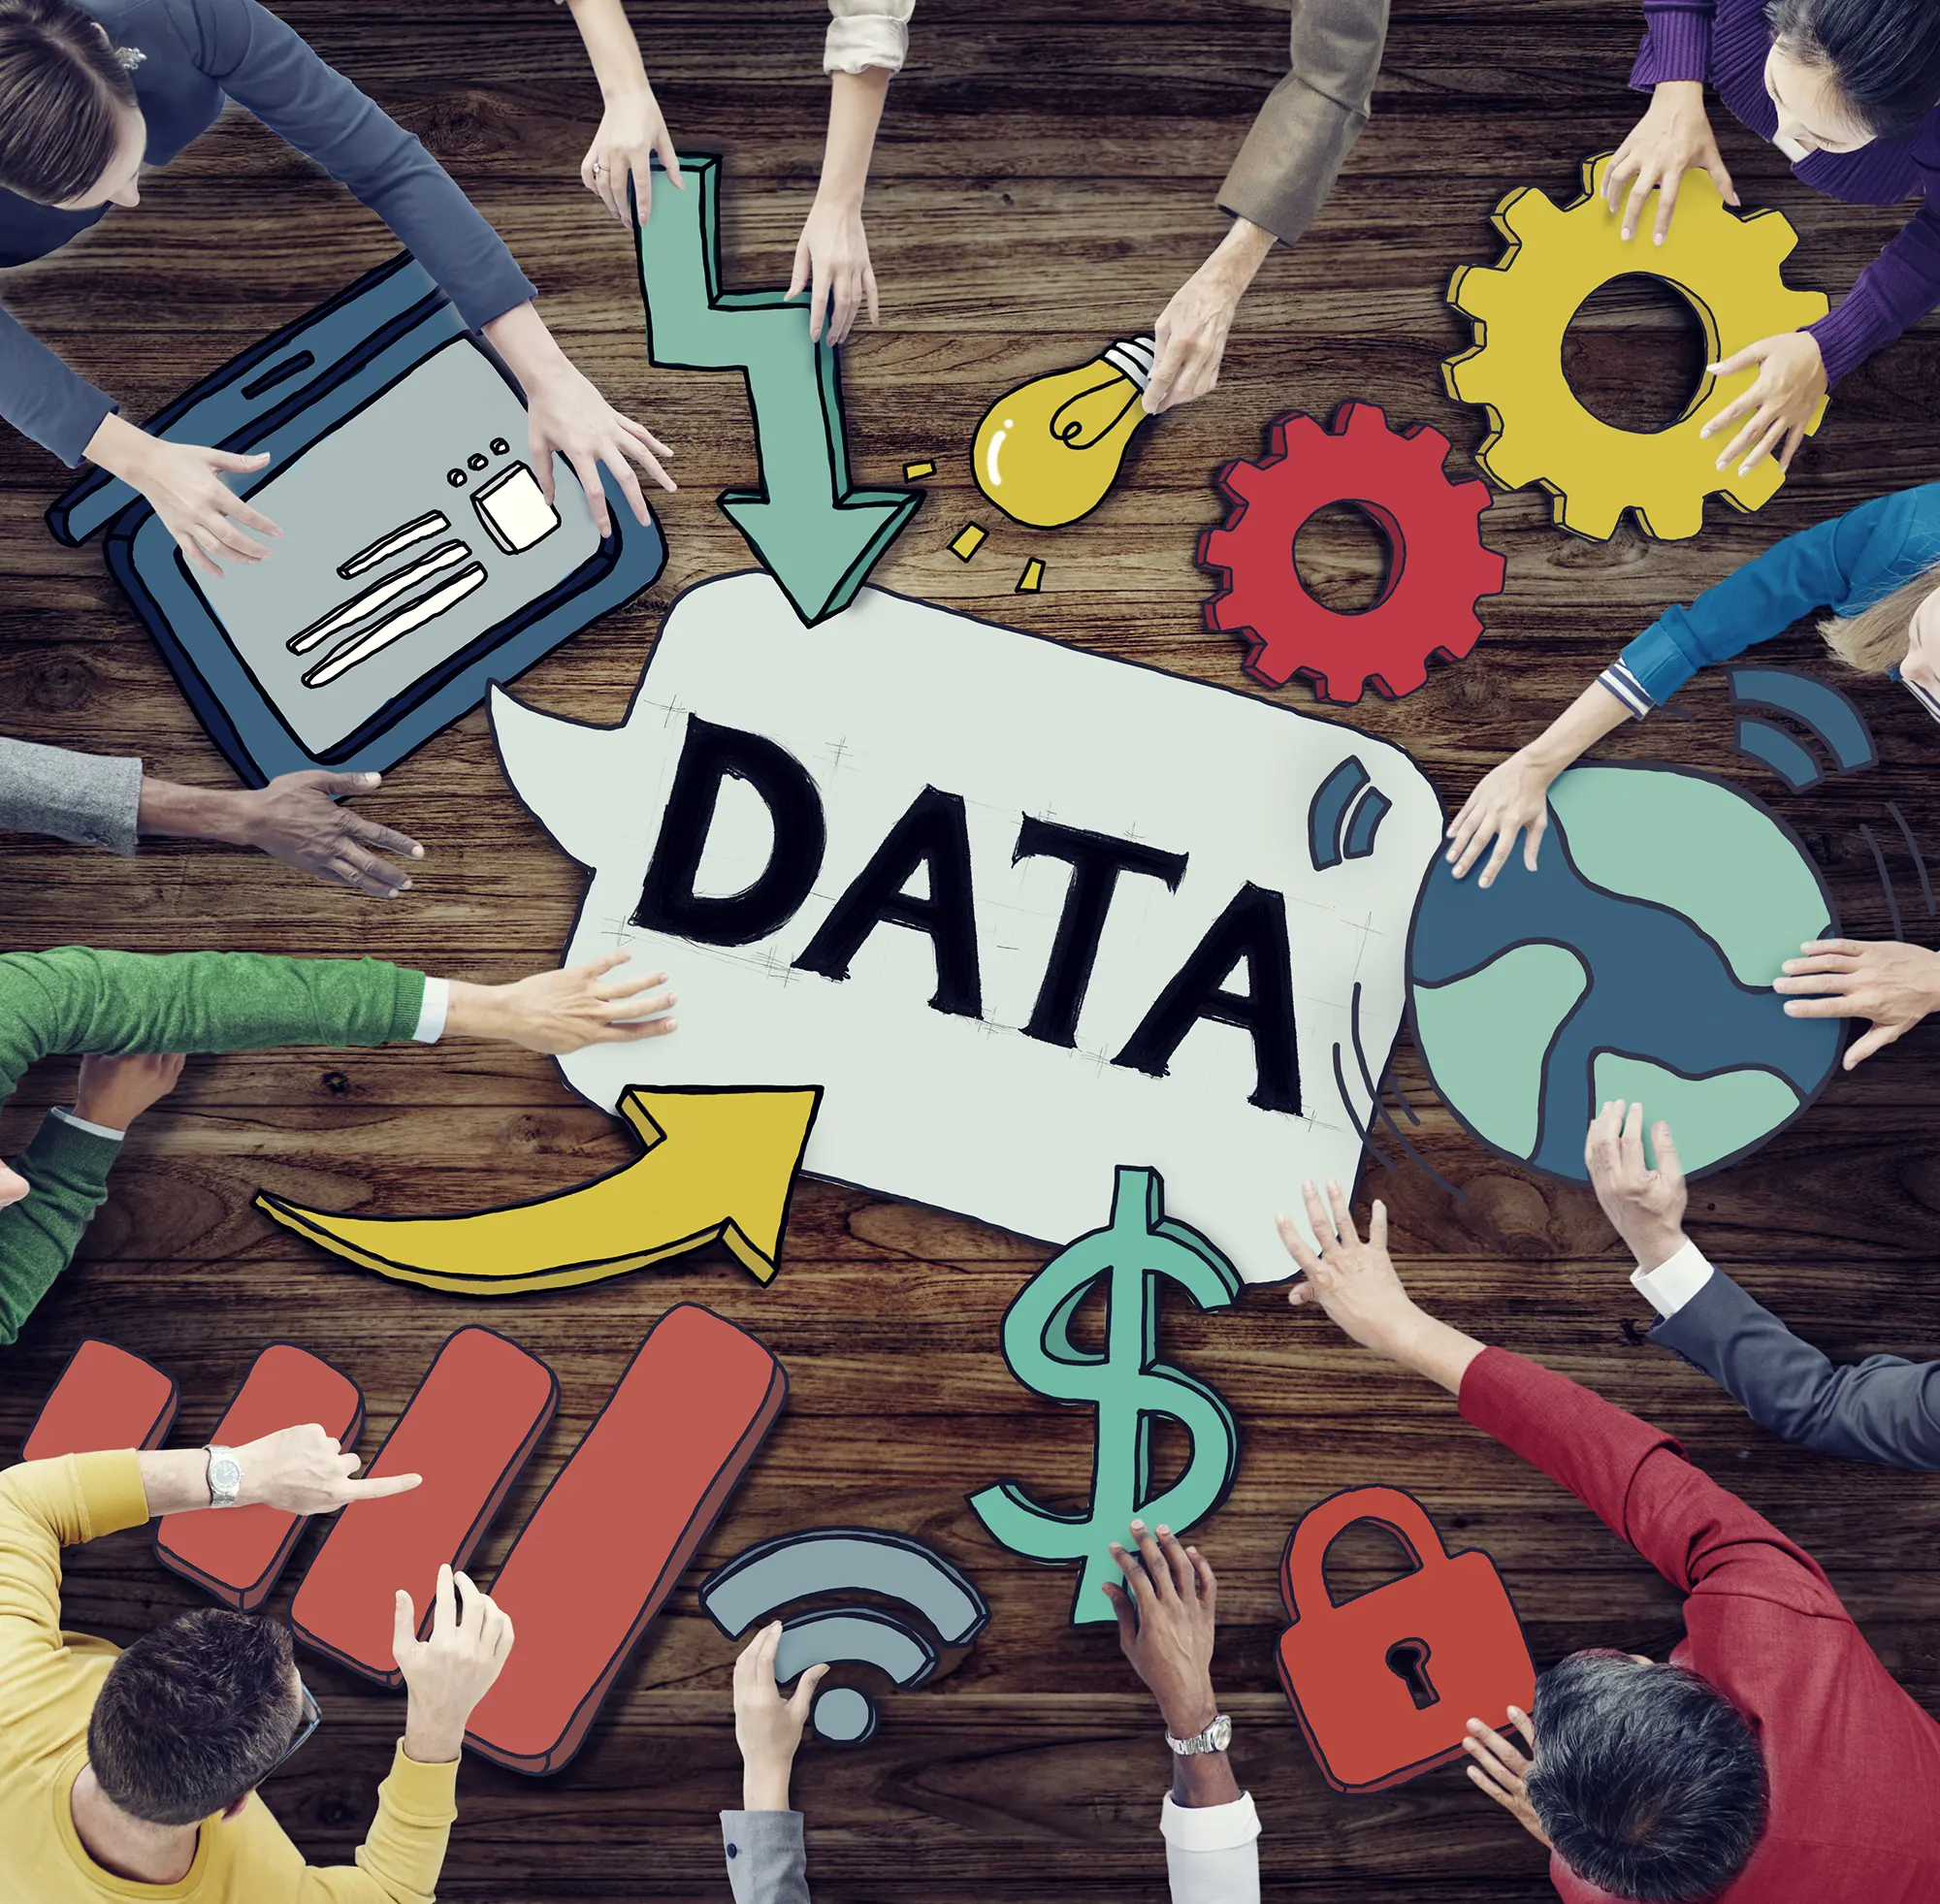 Data surrounded by economic symbols shutterstock_223247608